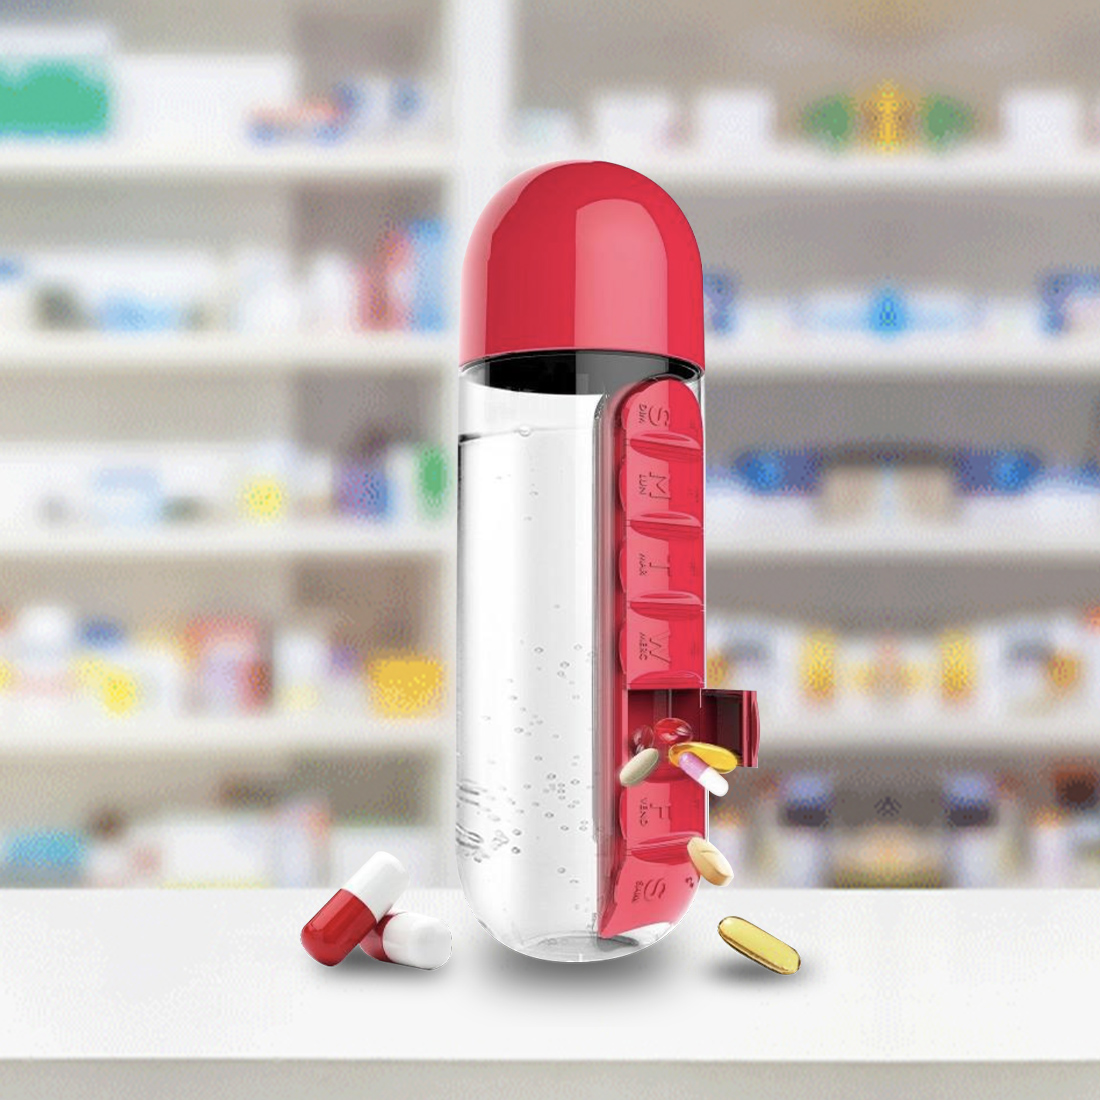 https://www.dtcworld.com.my/storage/product-images/3275/WaterBottlewithPillOrganizer(W)_20220311105812.jpg